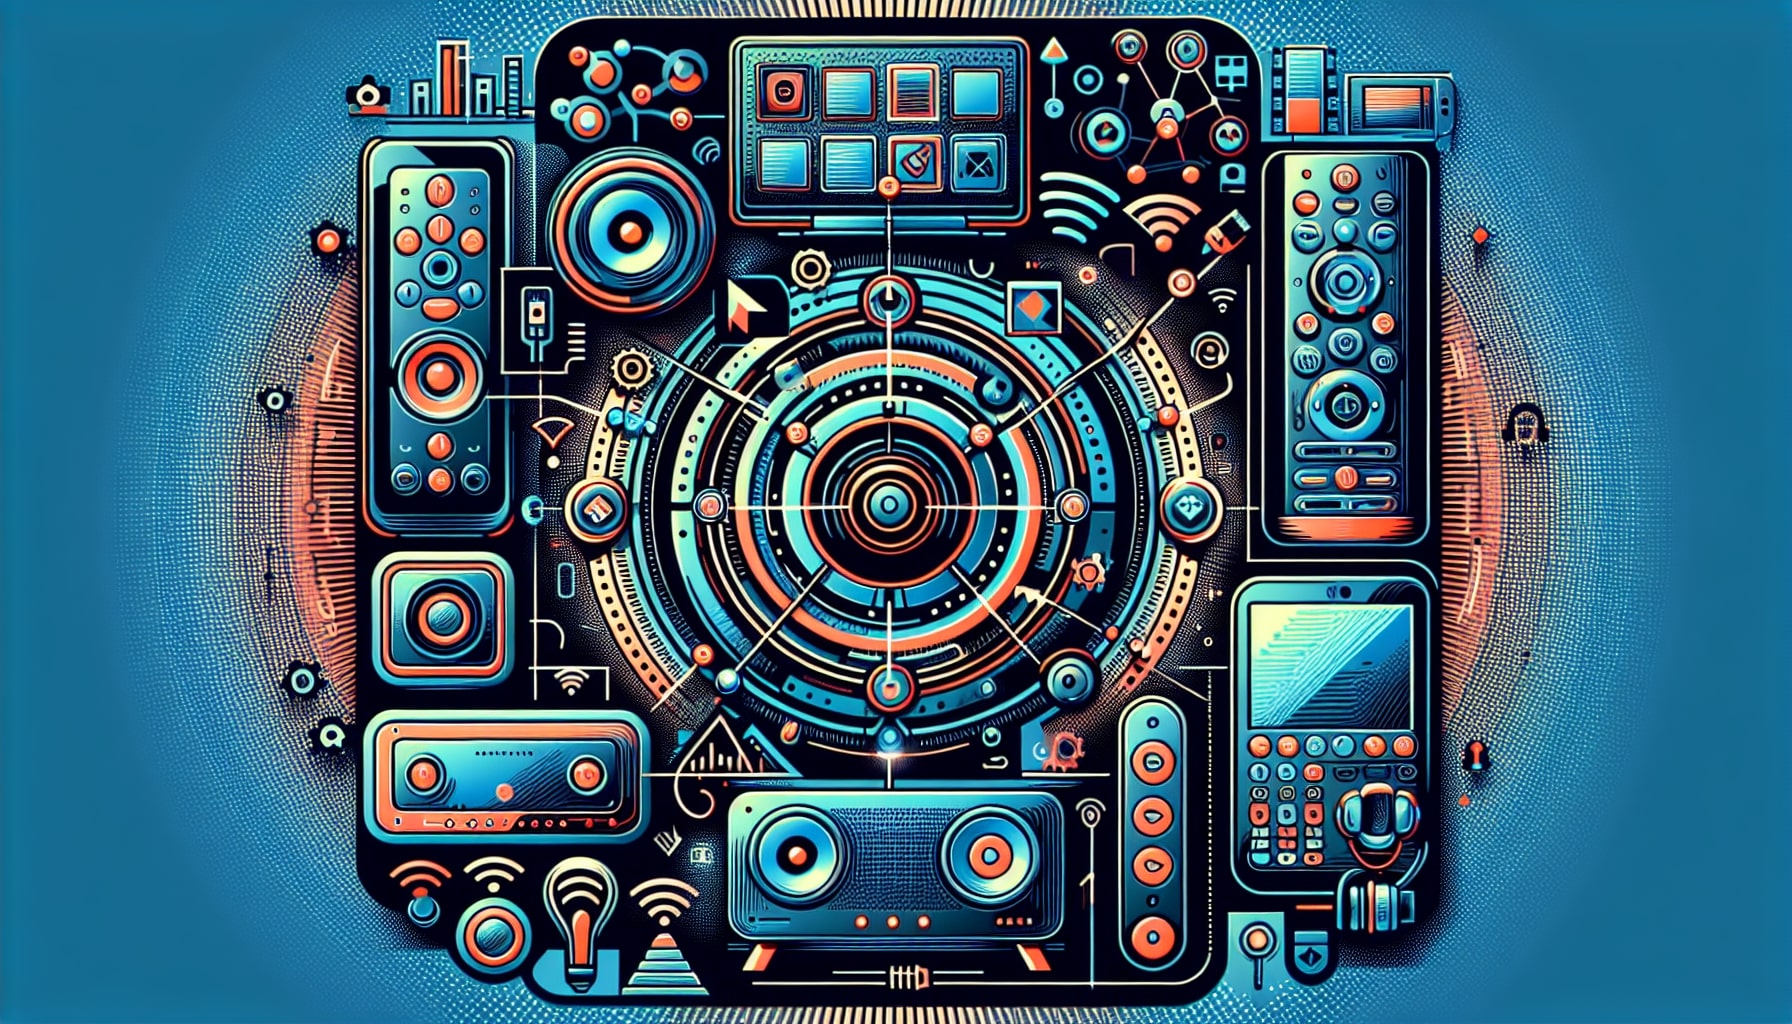 Colorful abstract digital technology and electronics illustration.